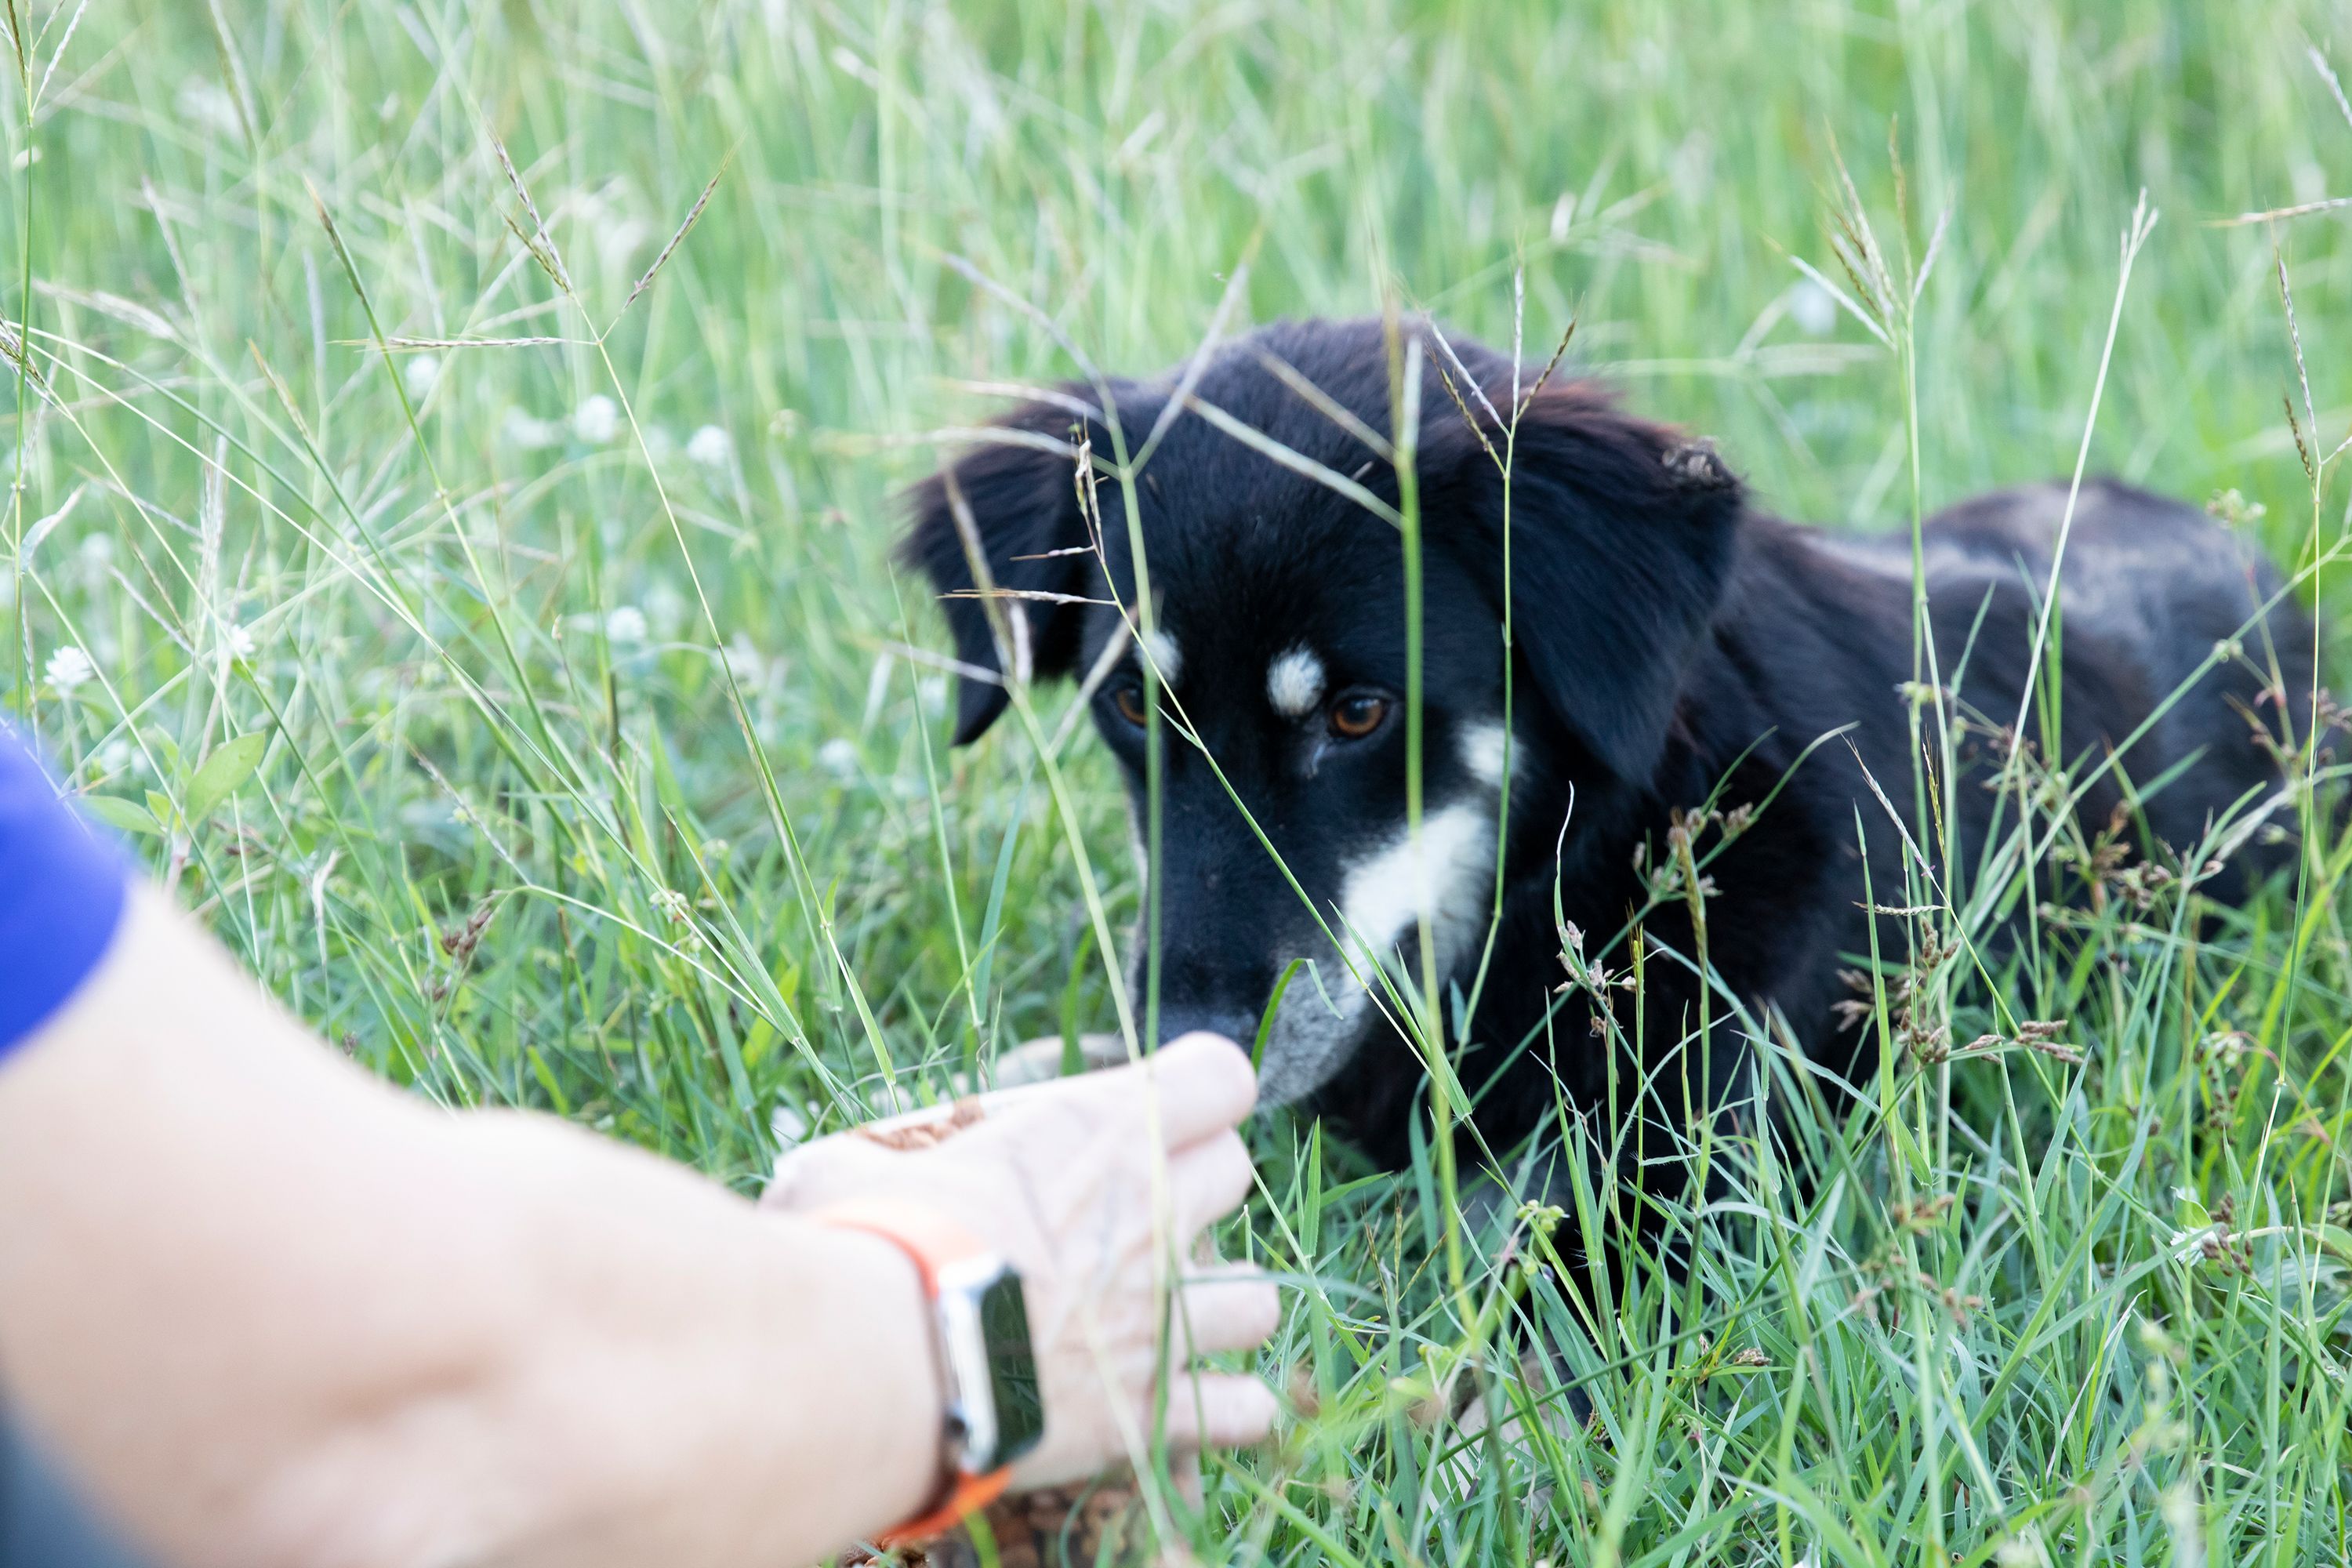 The dog, staying still slightly away, eating out of Beckles’ hand. Image by Jamie Holt. United States, 2019.